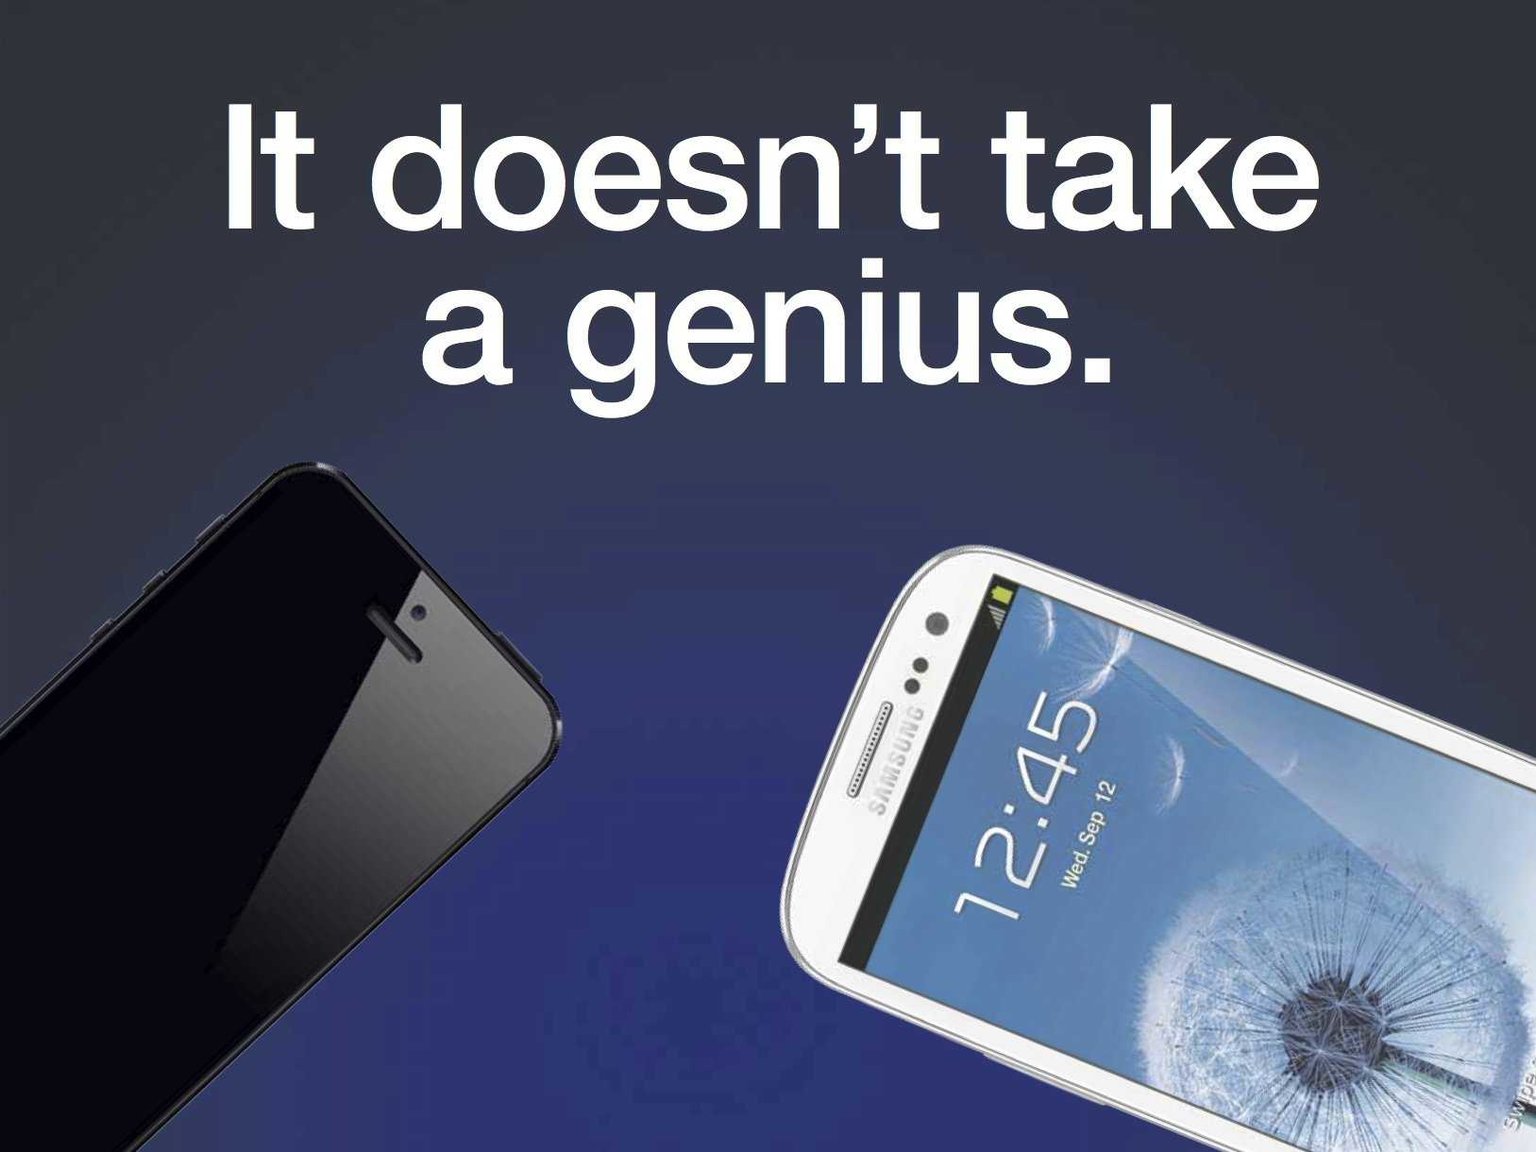 This is a Samsung ad designed to attack the iPhone, claiming that “it doesn’t take a genius” (to choose Samsung over apple.